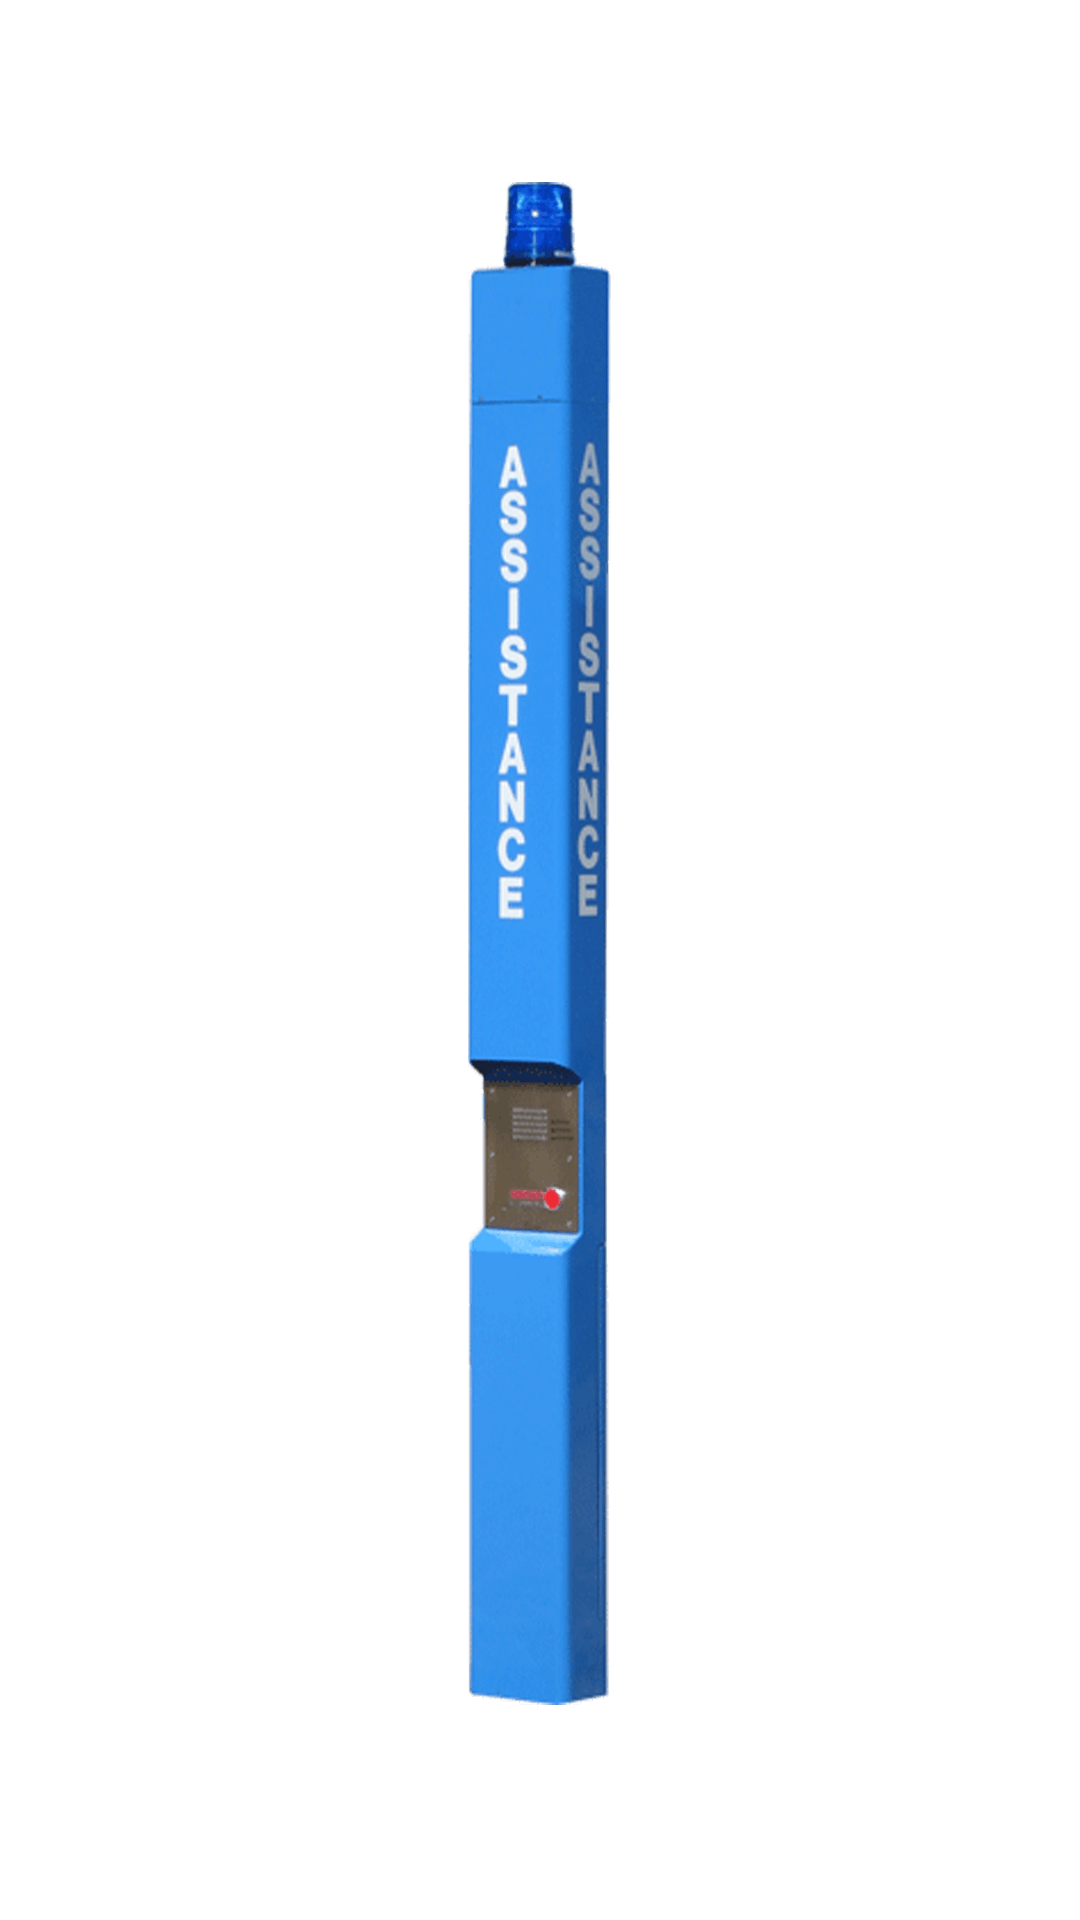 ECO Tower - Aluminum Blue Light Call Station Tower with Support for an Antenna